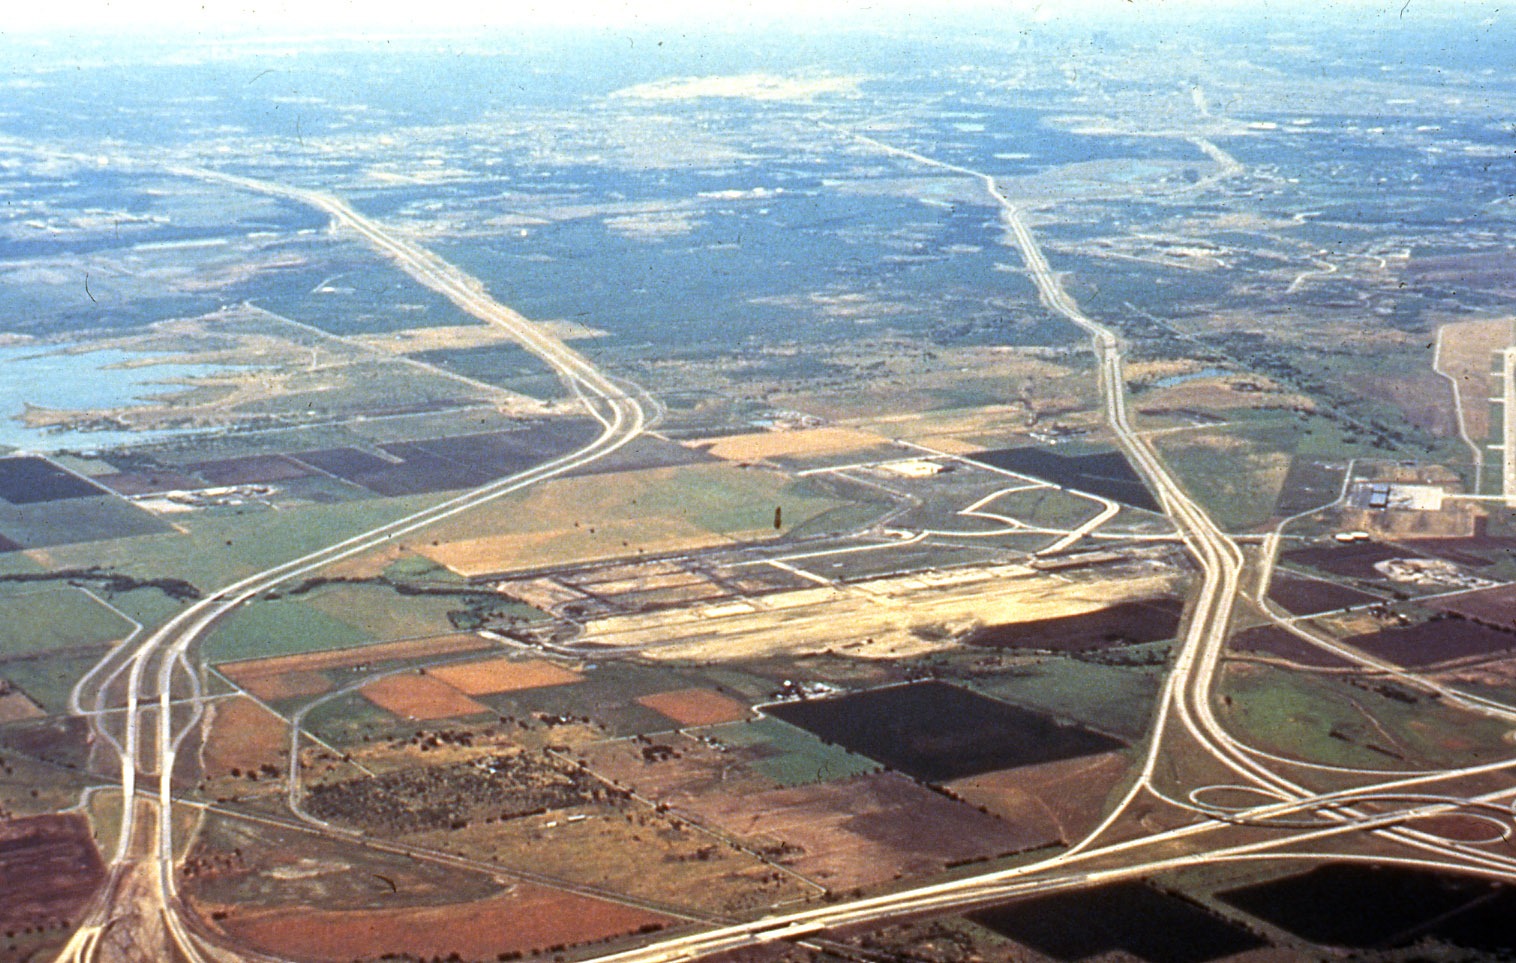 View from SH 121 near DFW Airport looking southeast to pre-development Las Colinas